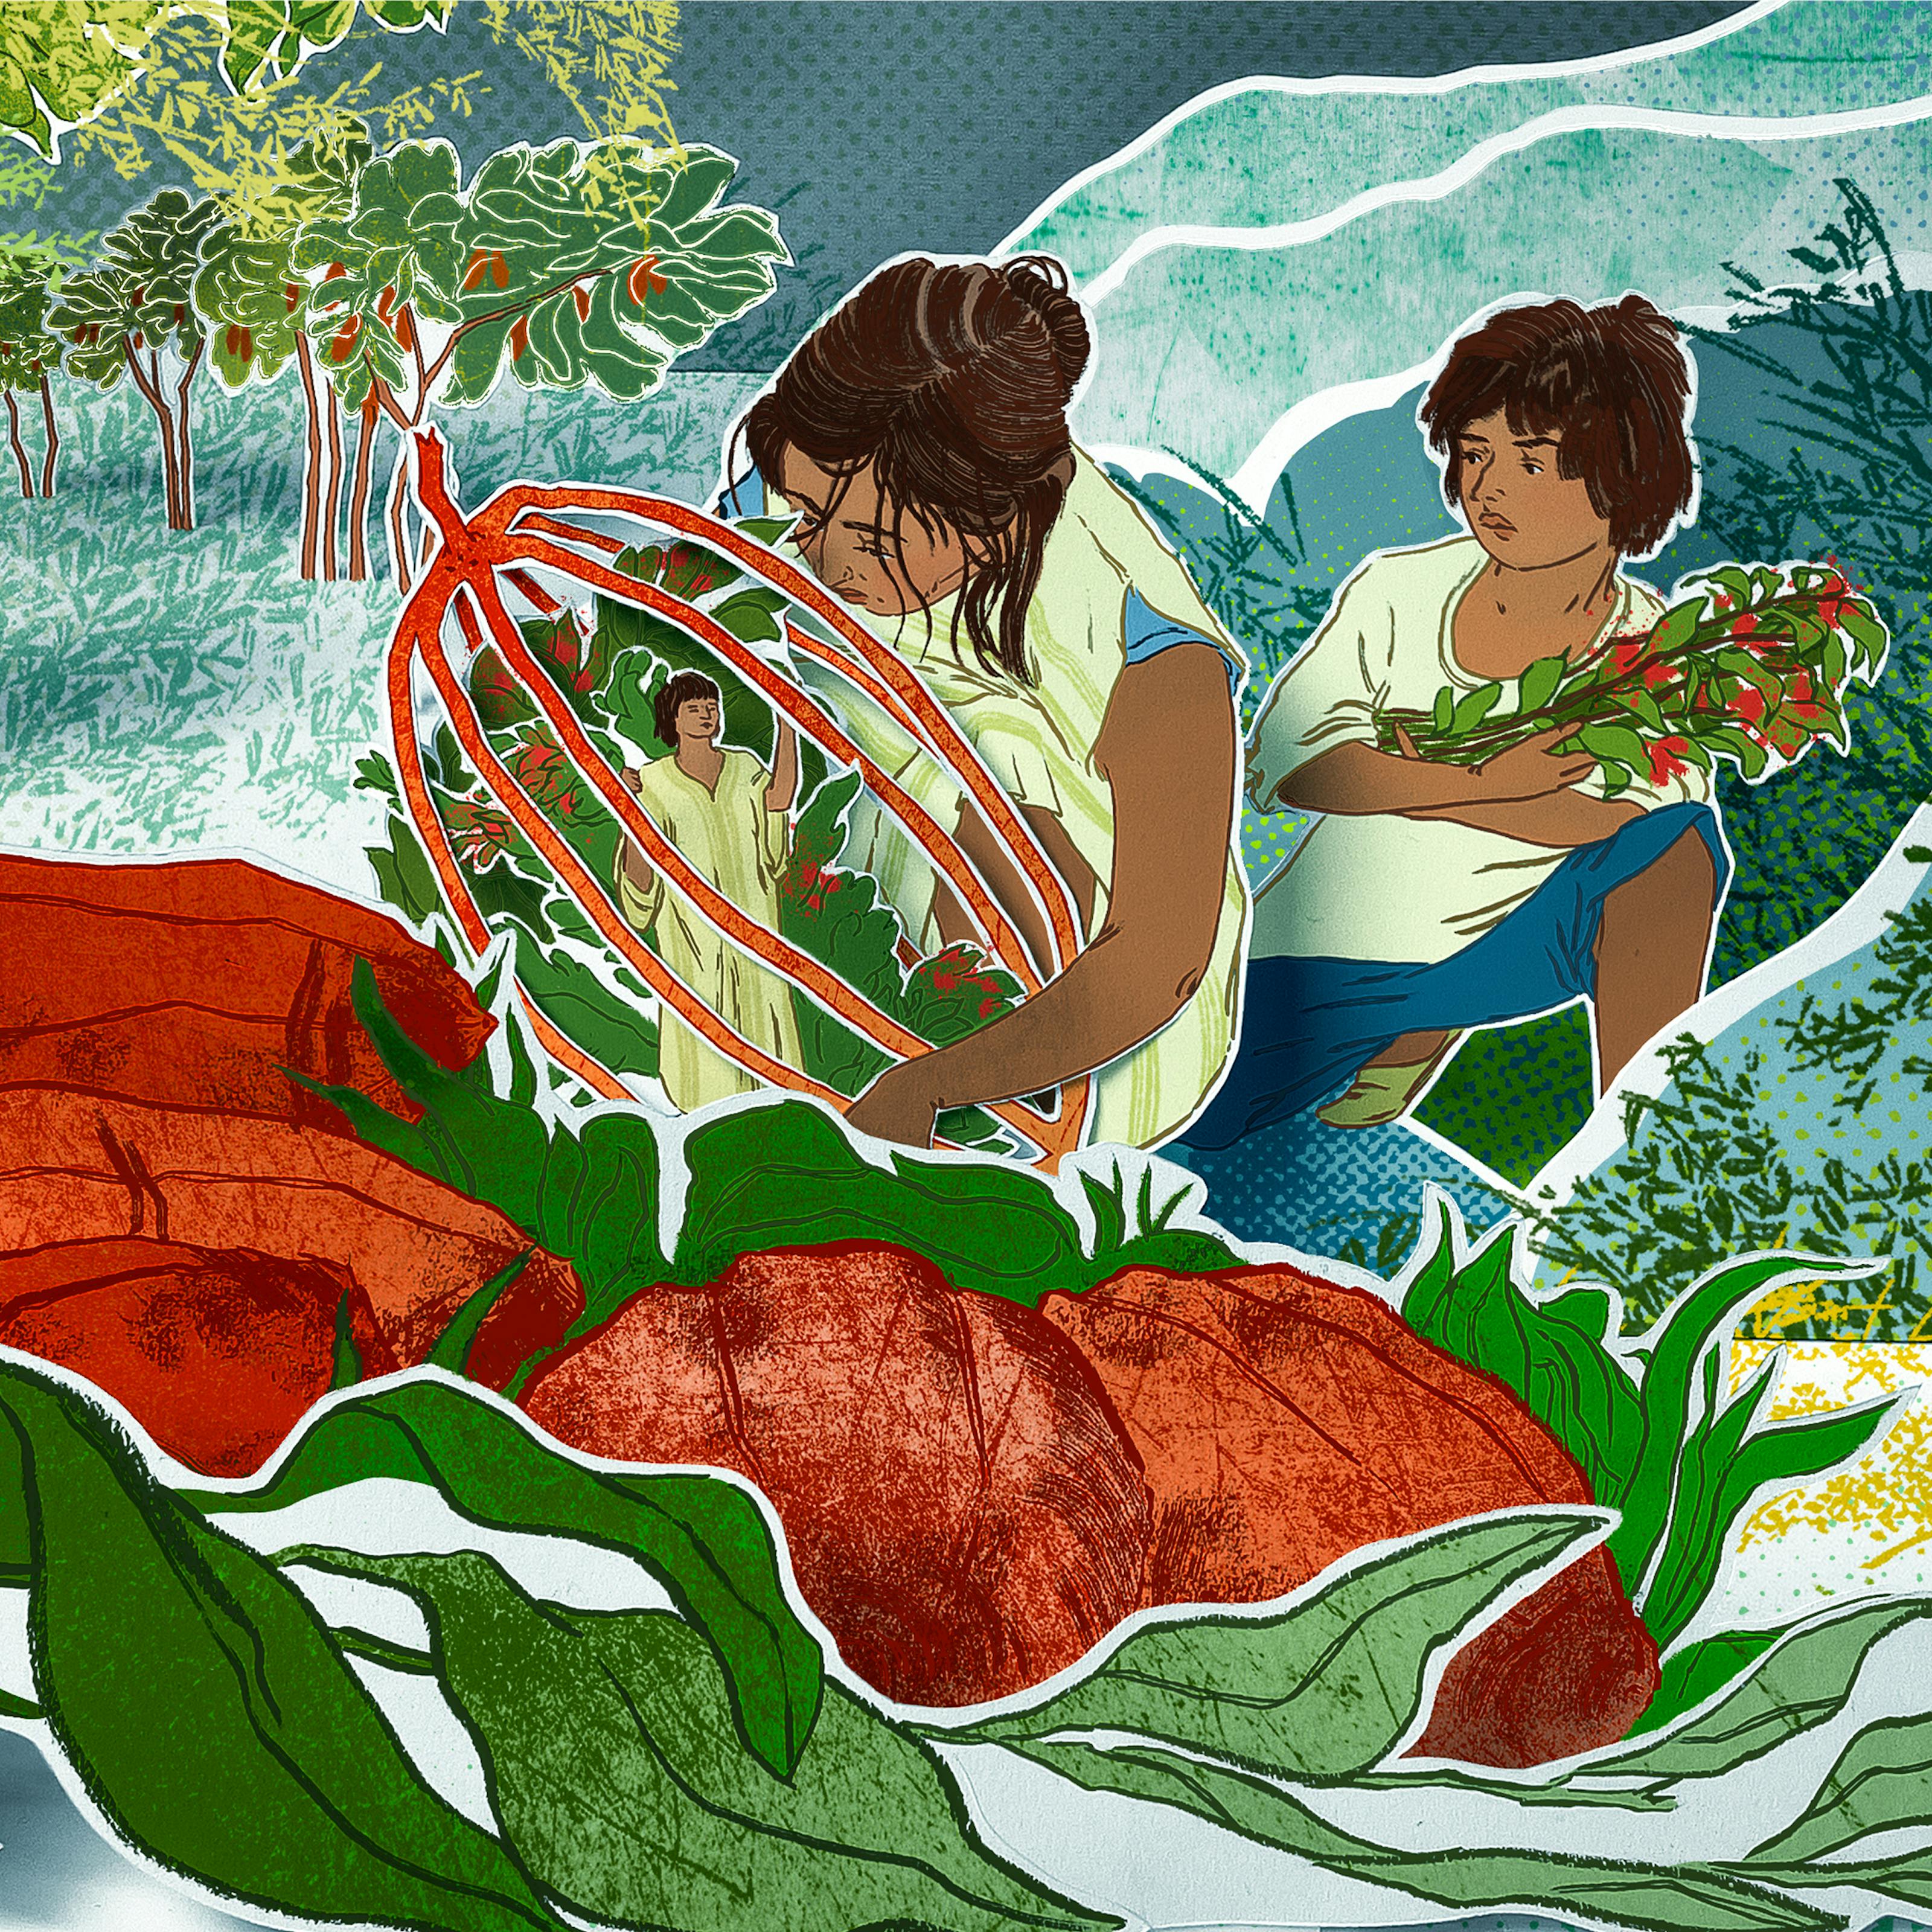 Photograph of a papercut 3D artwork. Two brunette children, possibly siblings, are shown dressed in simple white and blue clothing and are crouching down amongst different coloured shrubs, plants and trees. The girl, who appears older than the boy, is holding an abstract, cocoa bean-shaped hollow red structure. Inside it is a miniature brunette male wearing yellow robes, and some red and green shrubbery. He is looking upwards towards the girl with his hand outstretched. The younger boy, holding some harvested red and green plant, watches from in wonderment. 